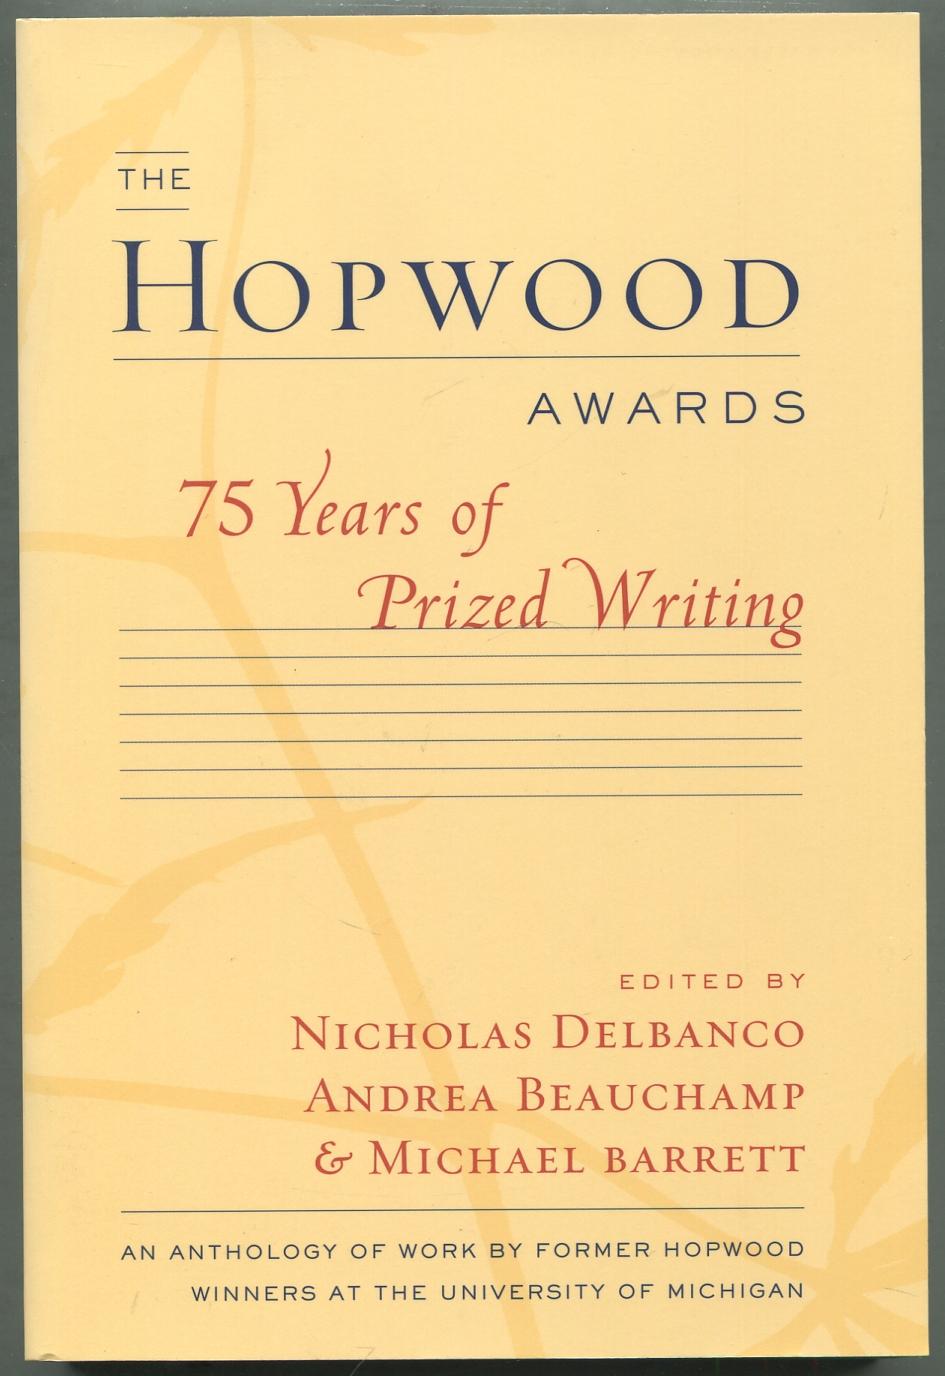 The Hopwood Awards: 75 Years of Prized Writing - DELBANCO, Nicholas, Andrea Beauchamp, and Michael Barrett, edited by